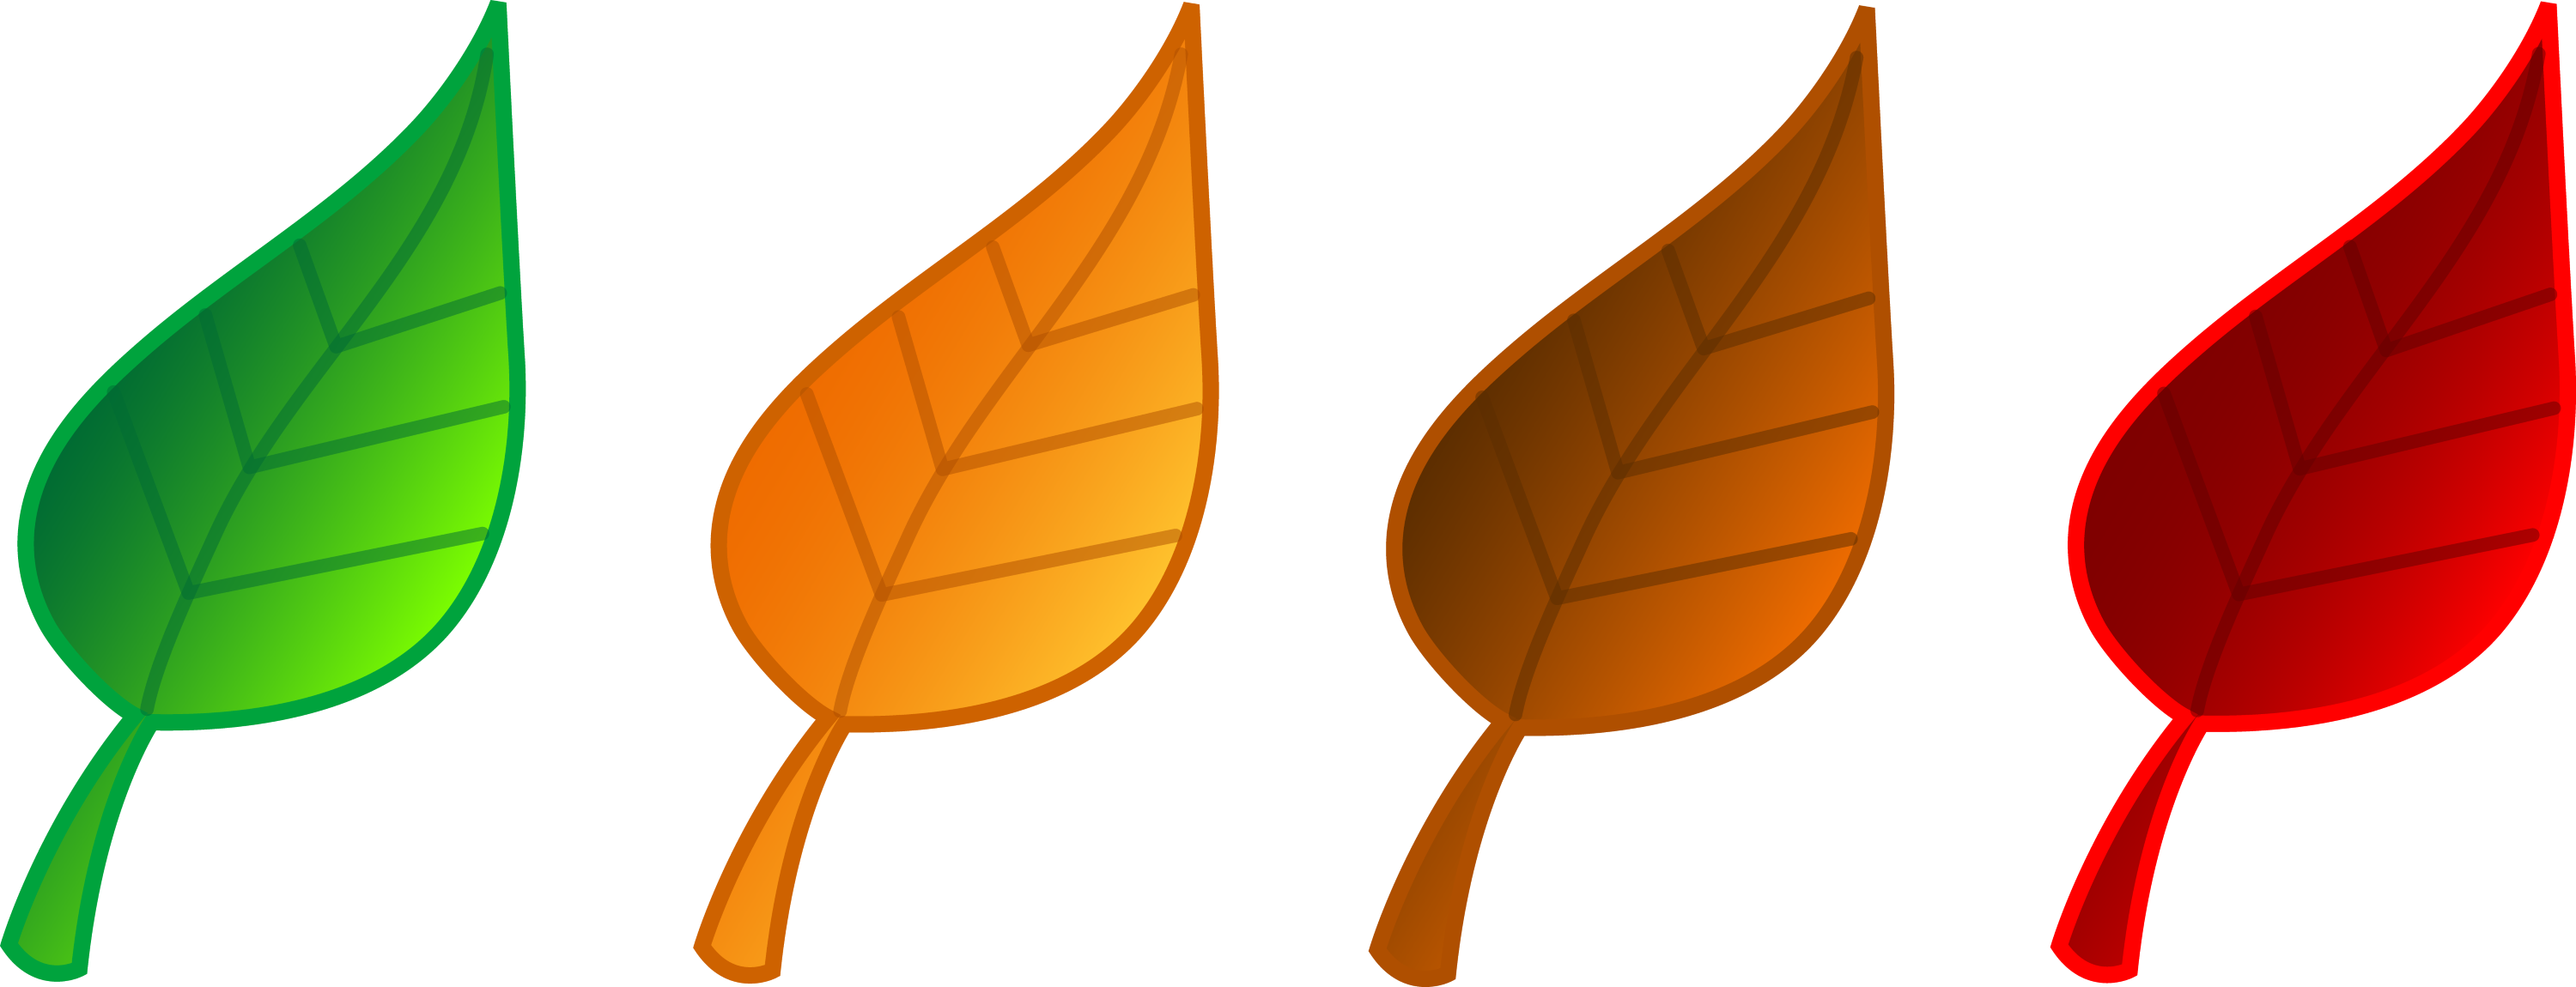 clipart trees and leaves - photo #44